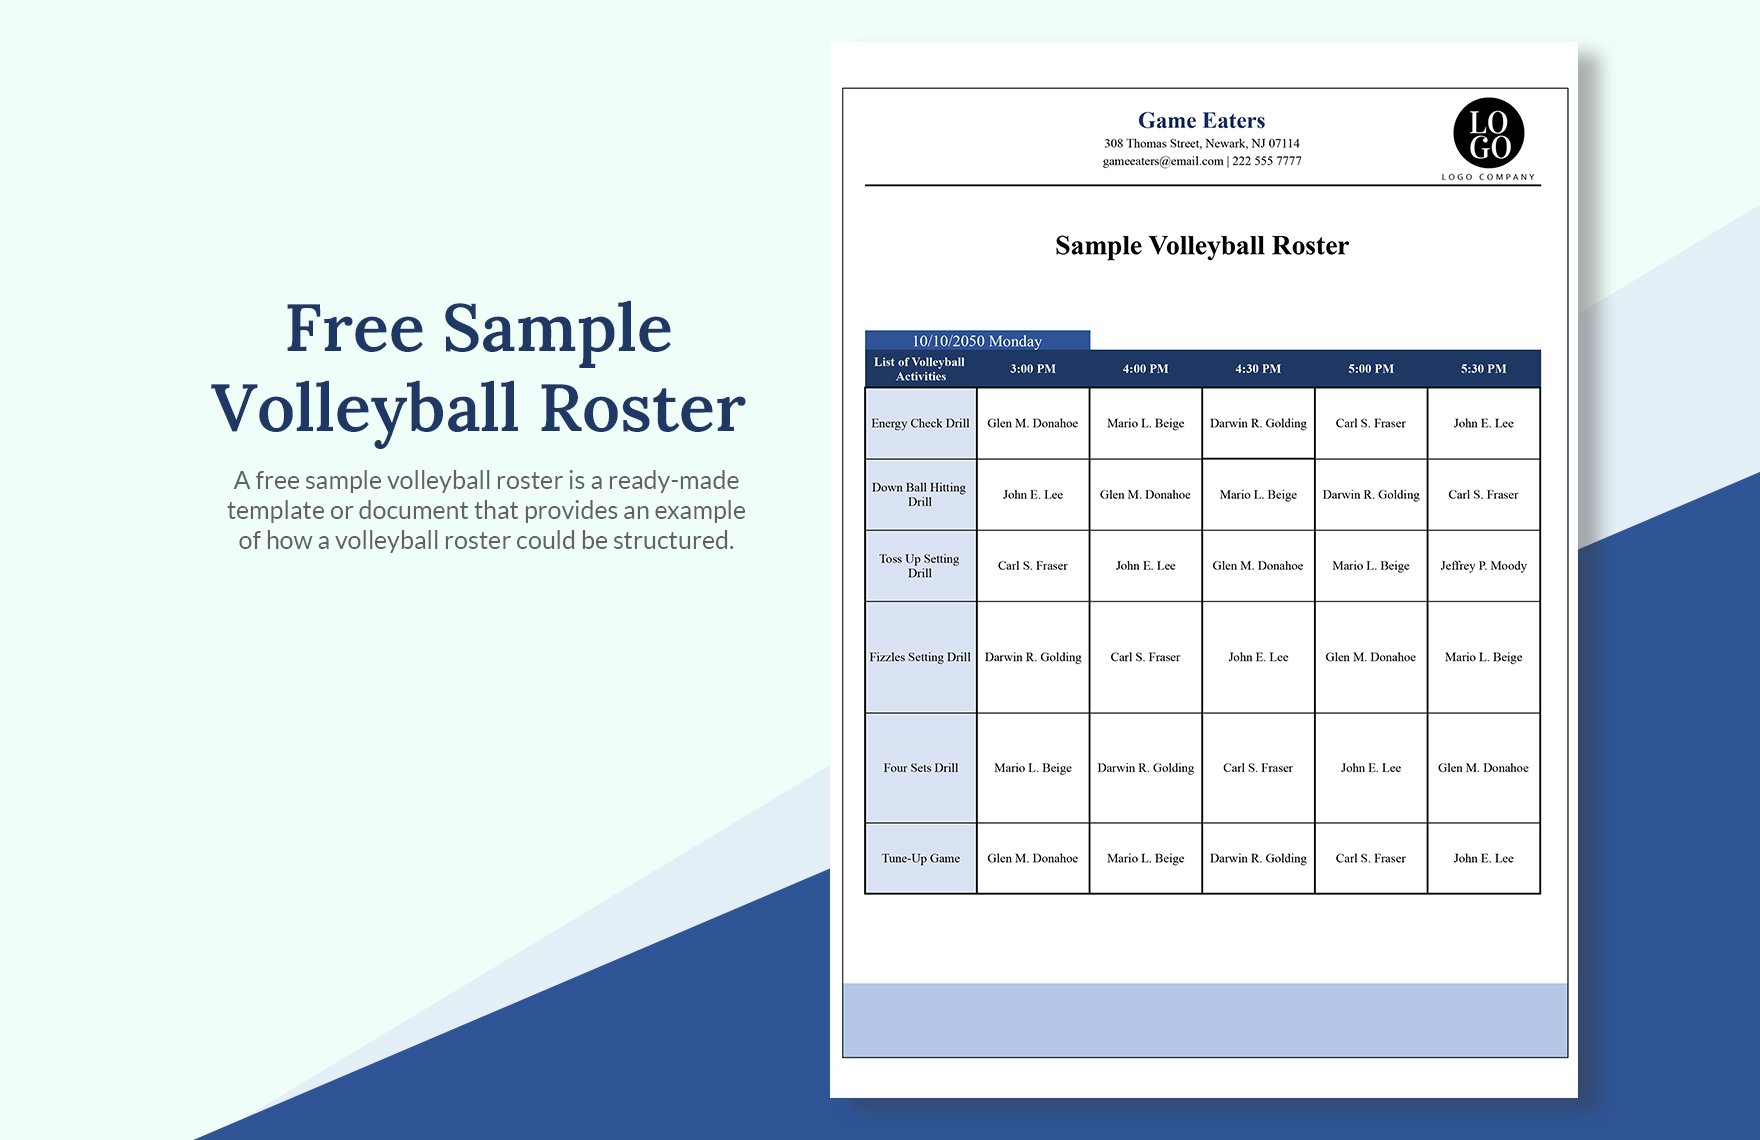 Sample Volleyball Roster